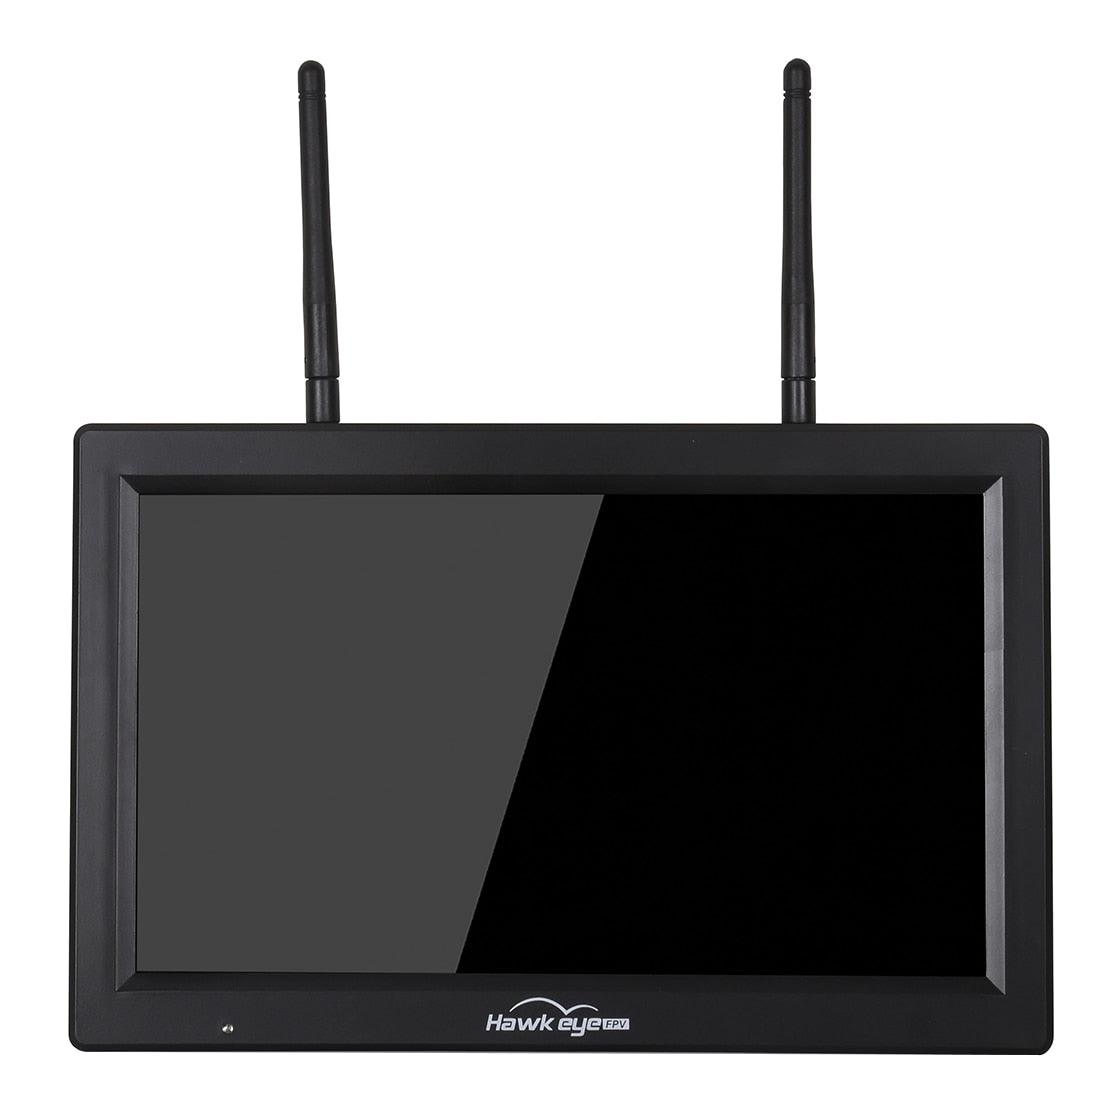 Hawkeye Little Pilot High Bright Screen FPV Monitor - Dual Receiver DVR 1280×720 10.2 inch1000lux 5.8GHz Display 3S-6S For FPV RC Racing Drone - RCDrone